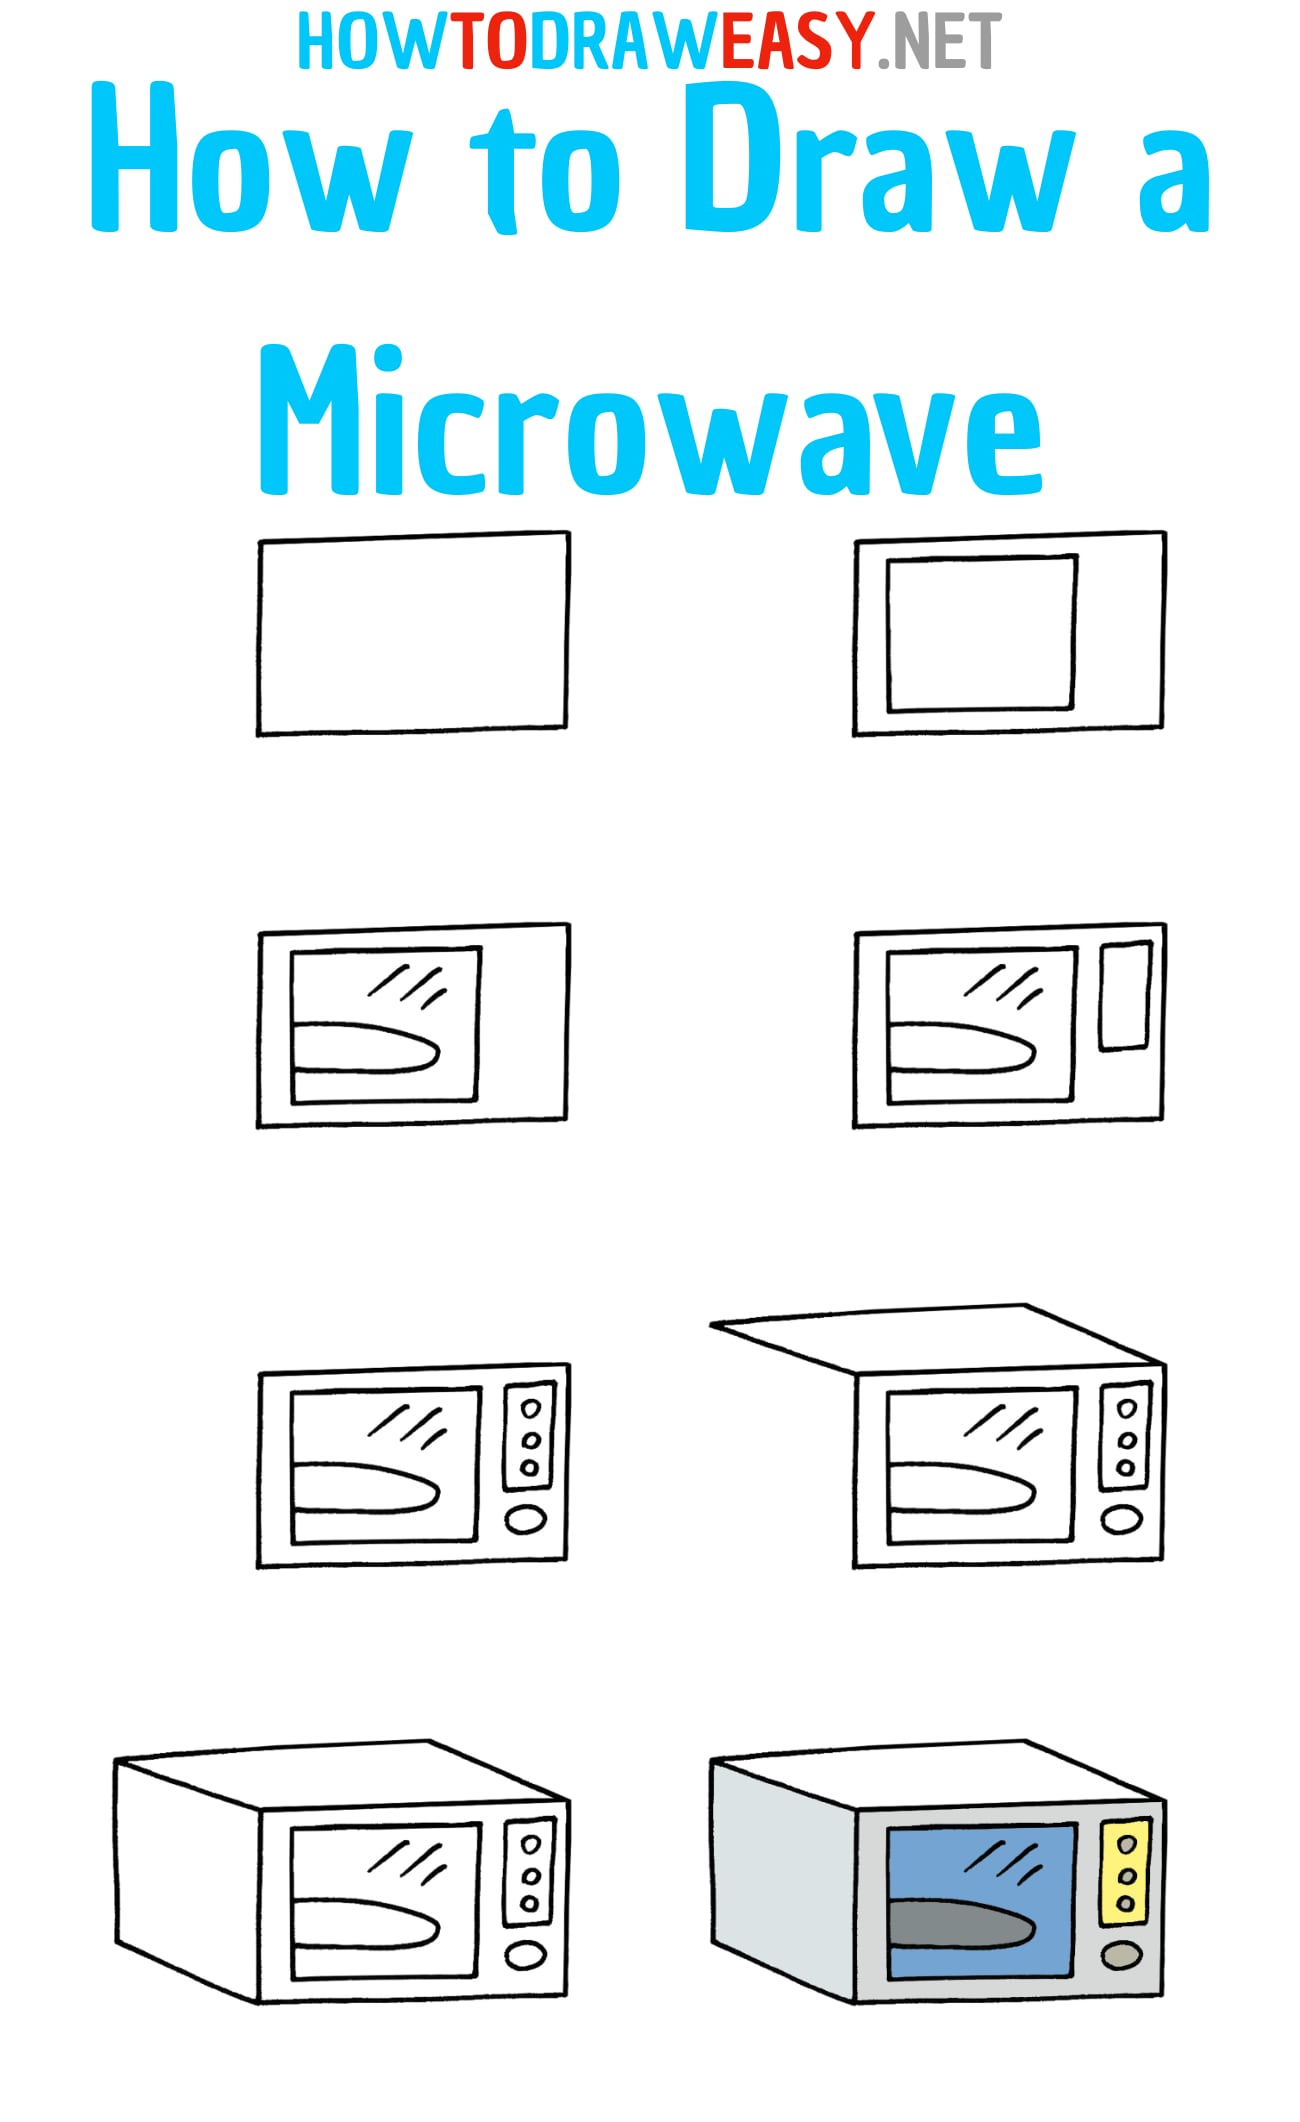 How to Draw a Microwave Step by Step